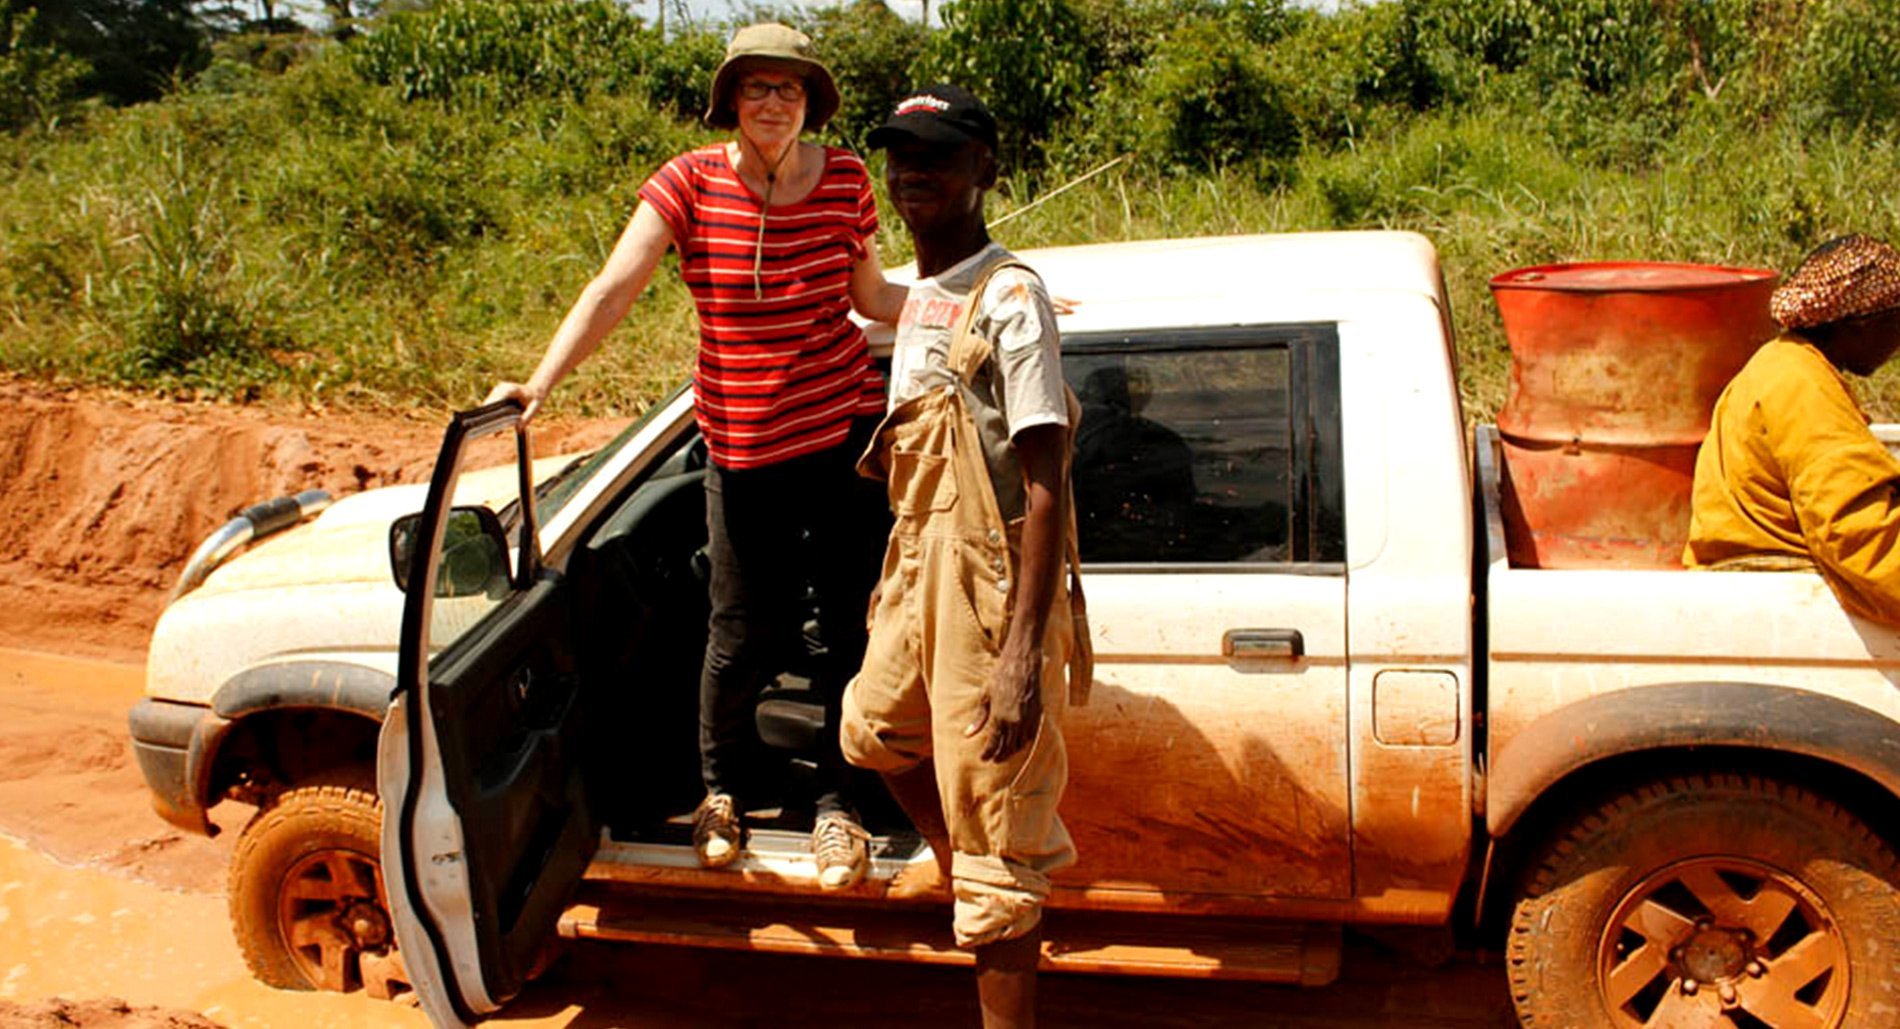 Senior Crisis Response Adviser Joanne Mariner and her car, stuck in the mud in the Central African Republic.